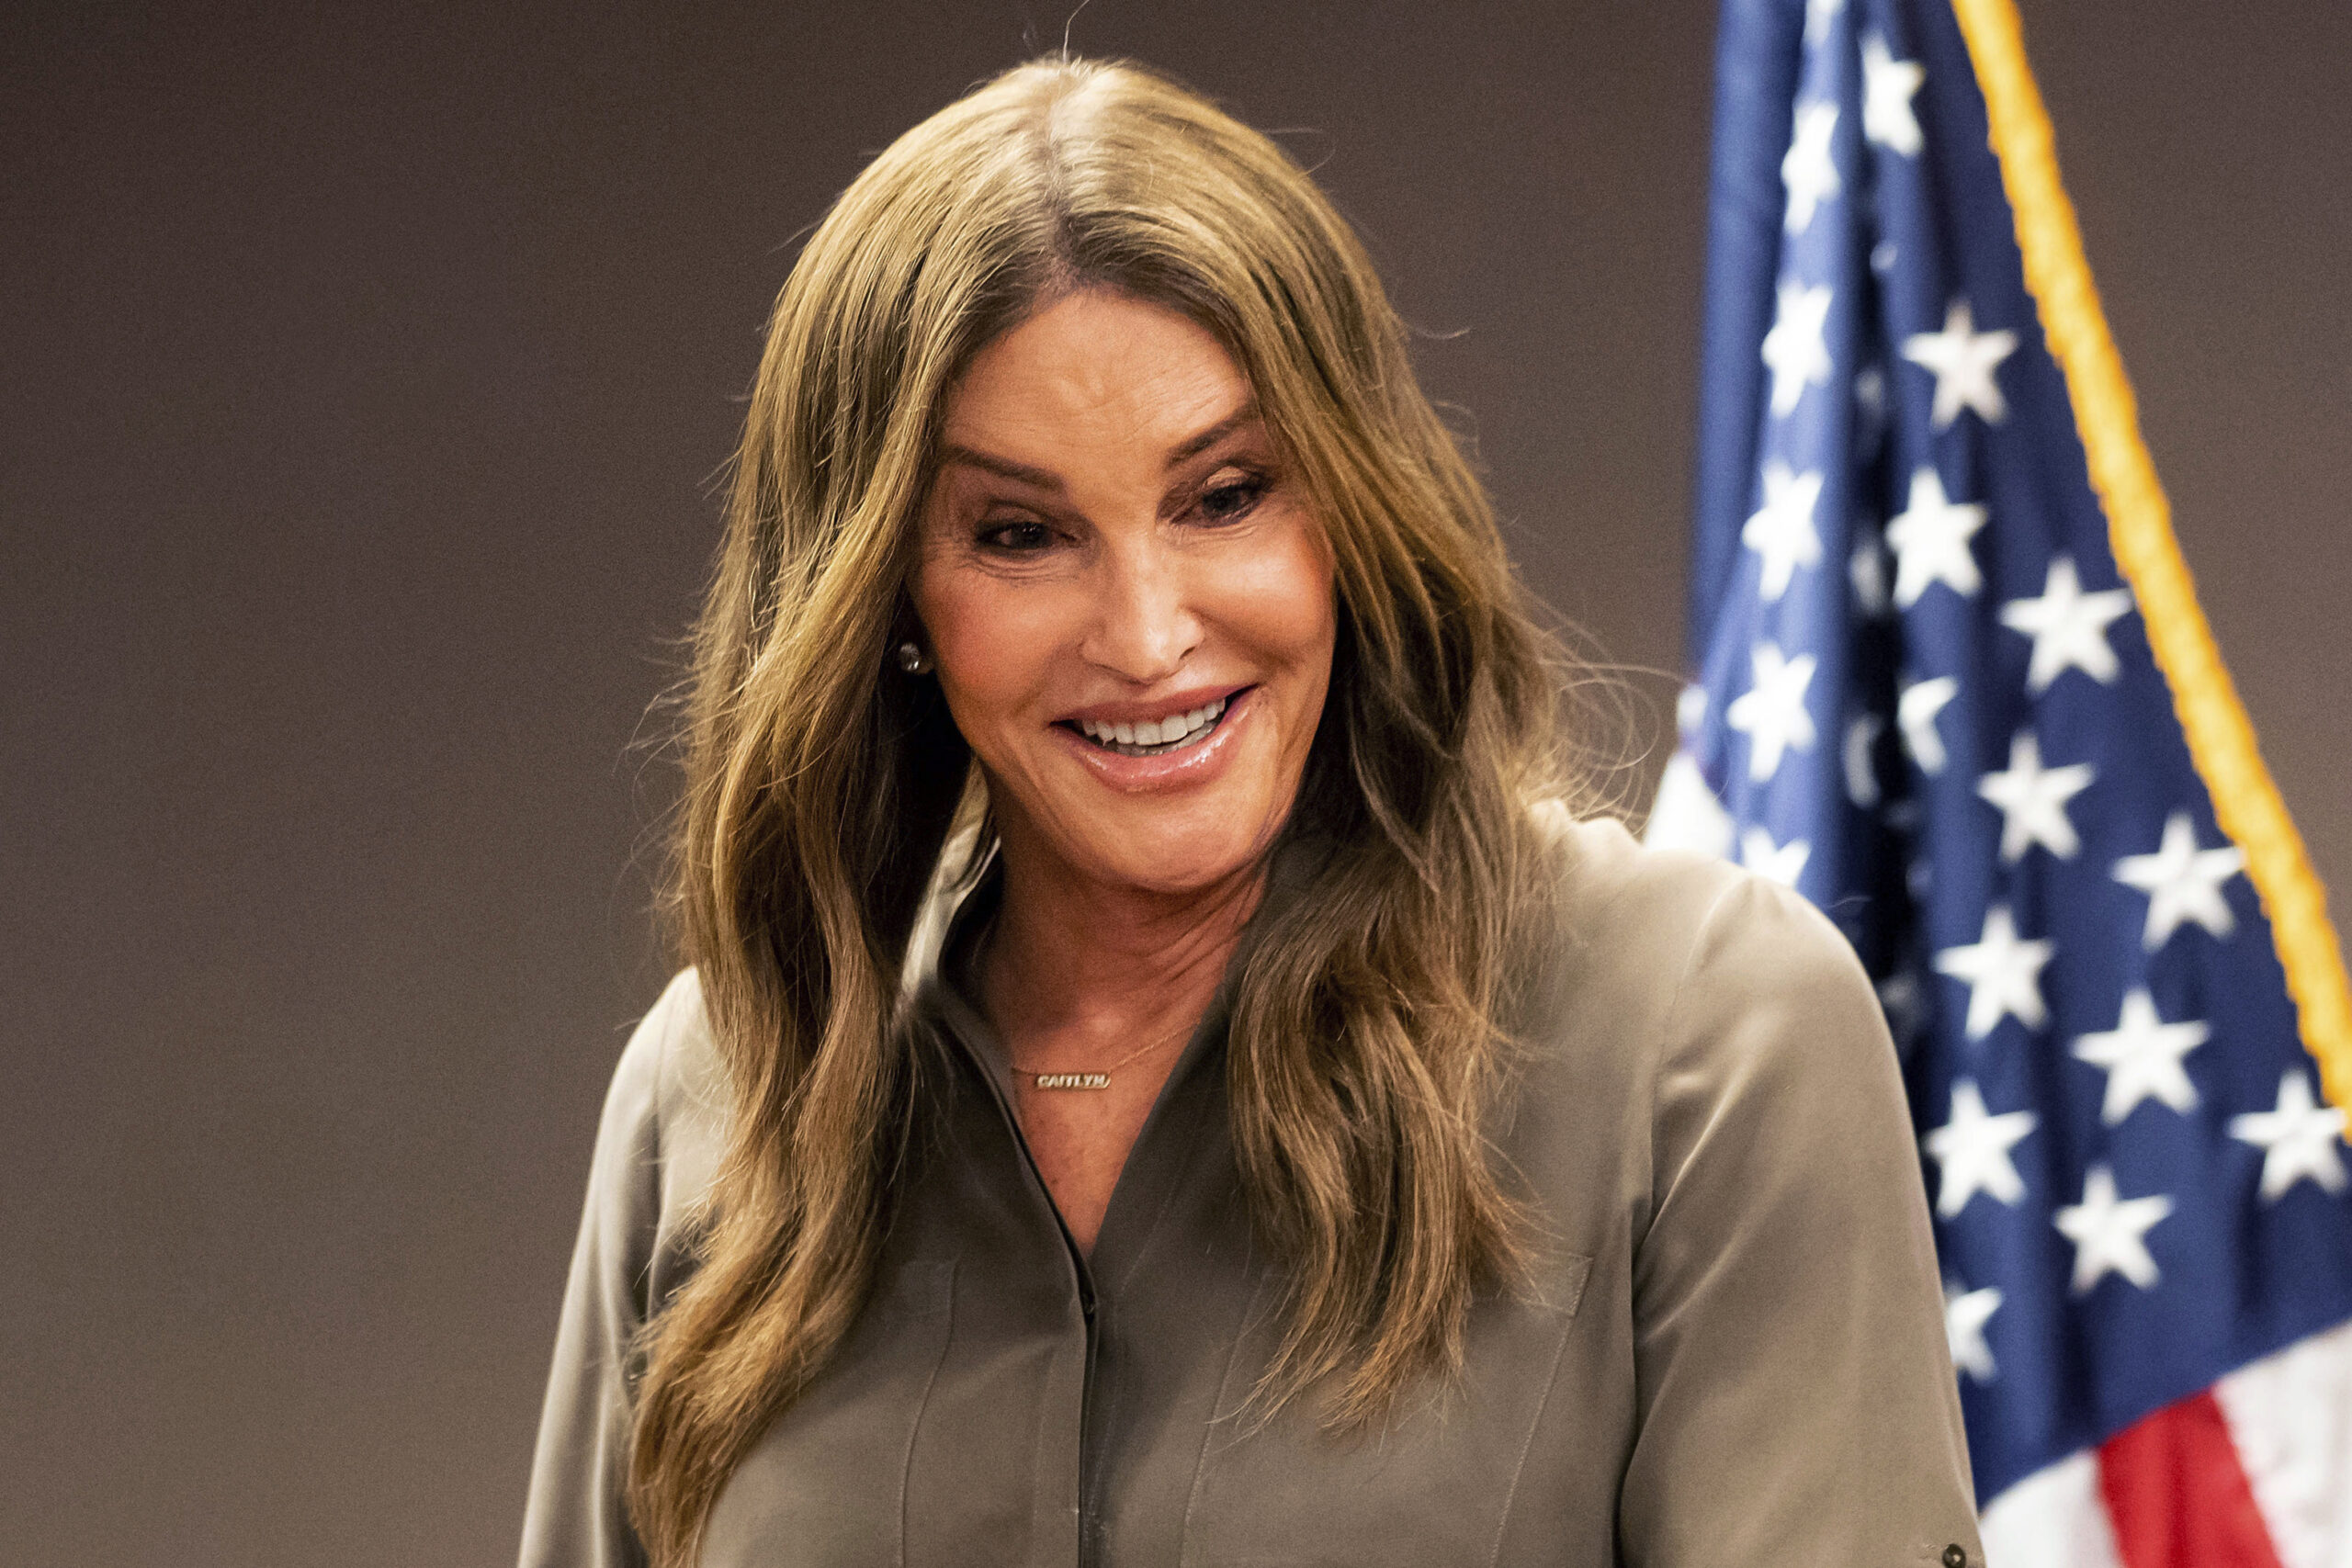 ‘You Have Bigger Breasts Than Me!’ Caitlyn Jenner Mocks Anti-Trans Republican Pundit, Asks If He’s ‘Transitioning’ (mediaite.com)